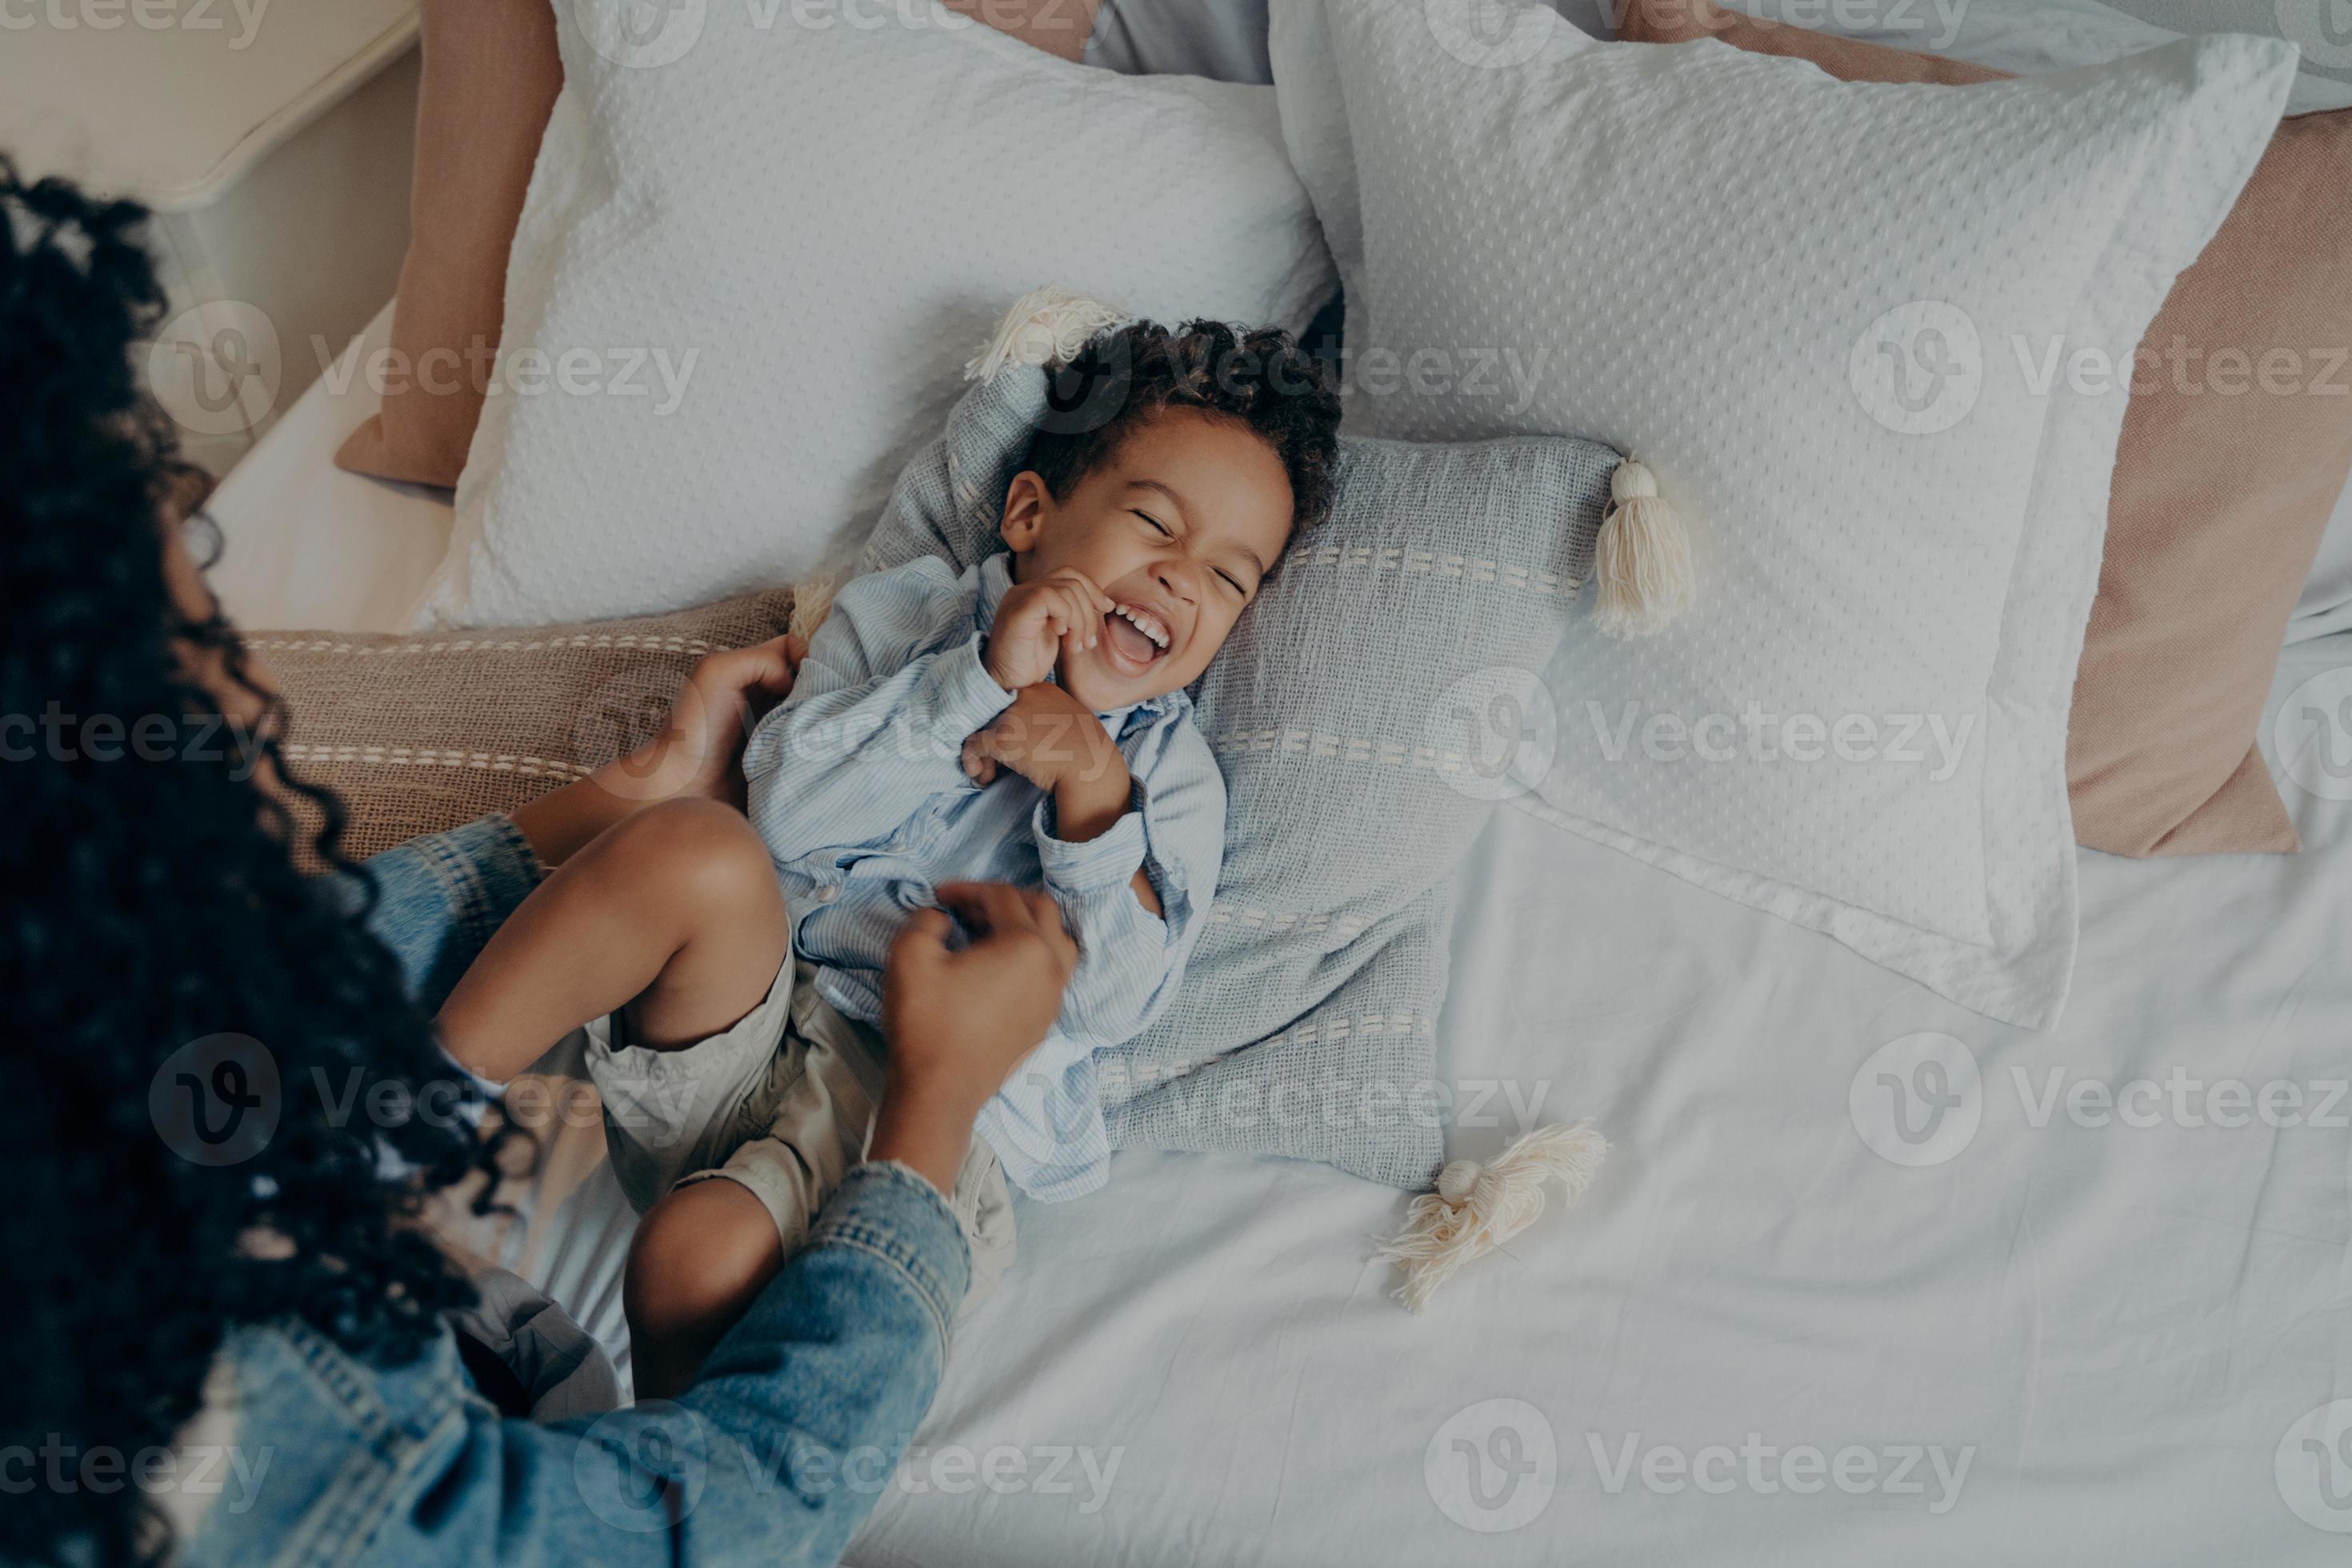 carl stephan add mom and son in bed photo